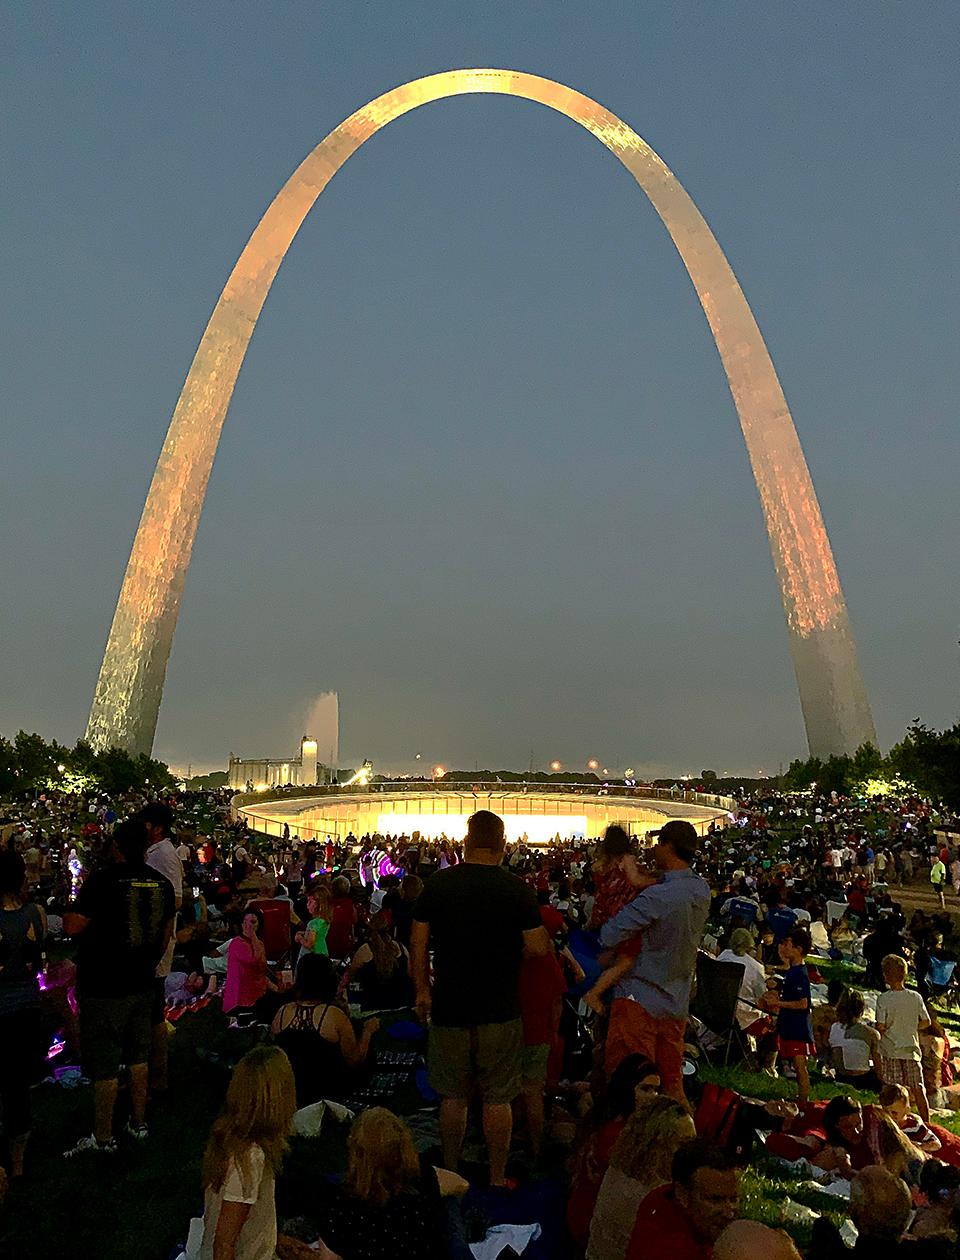 People waiting on the Arch grounds waiting for the 4th of July Fireworks show to start.